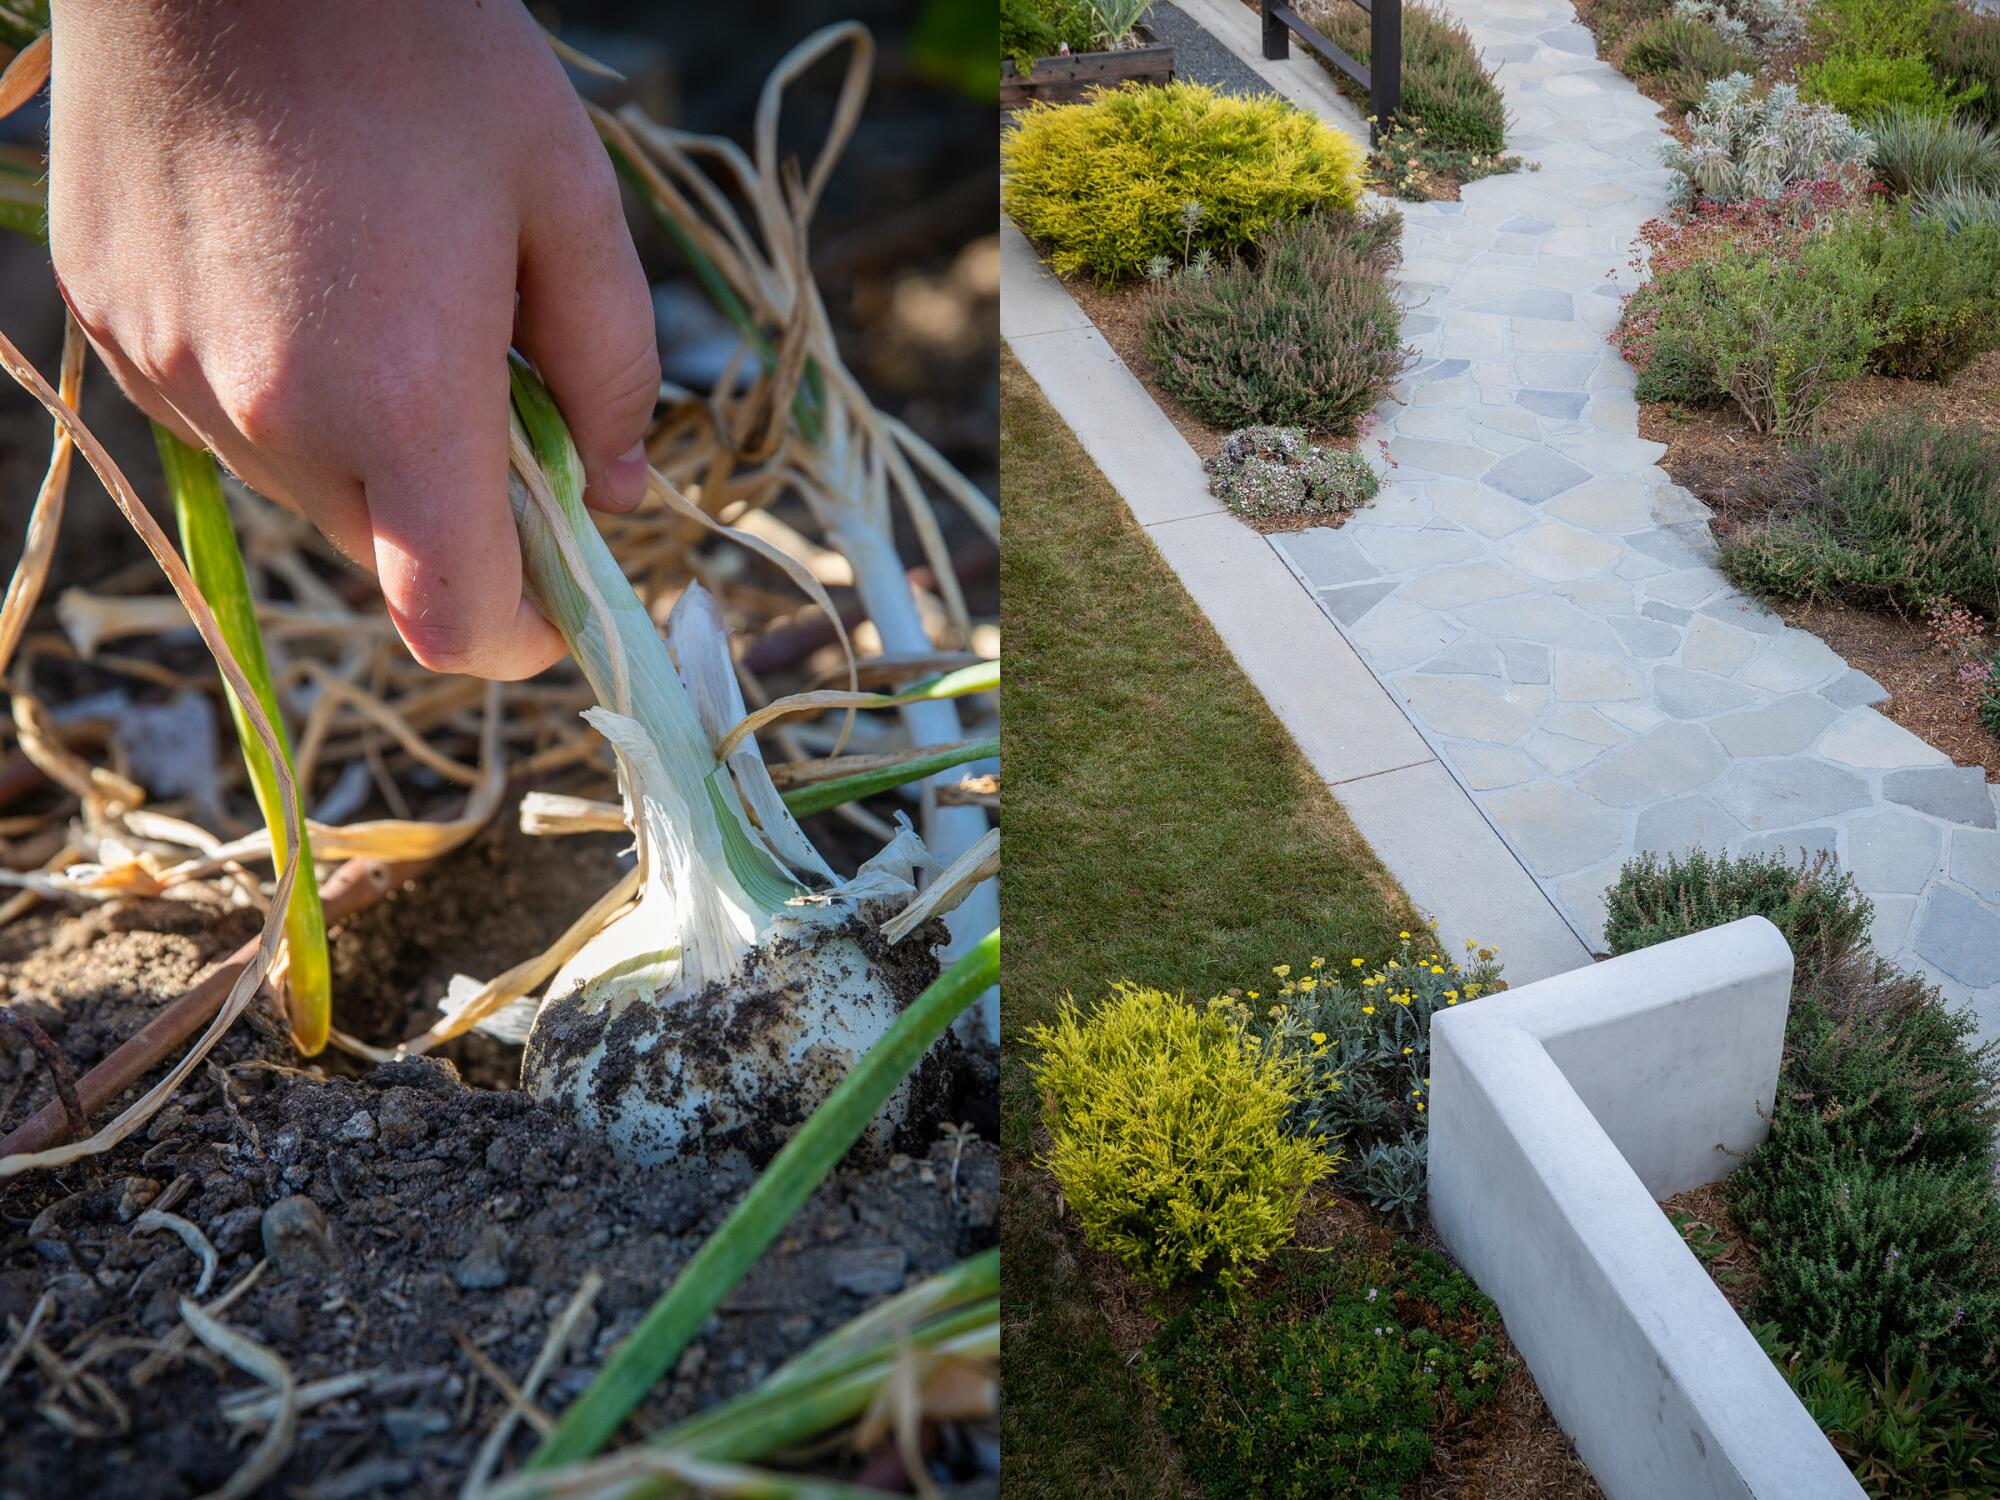 Two photos, one showing a hand grabbing an onion from the ground and the other of a lawn, concrete path and native plants.